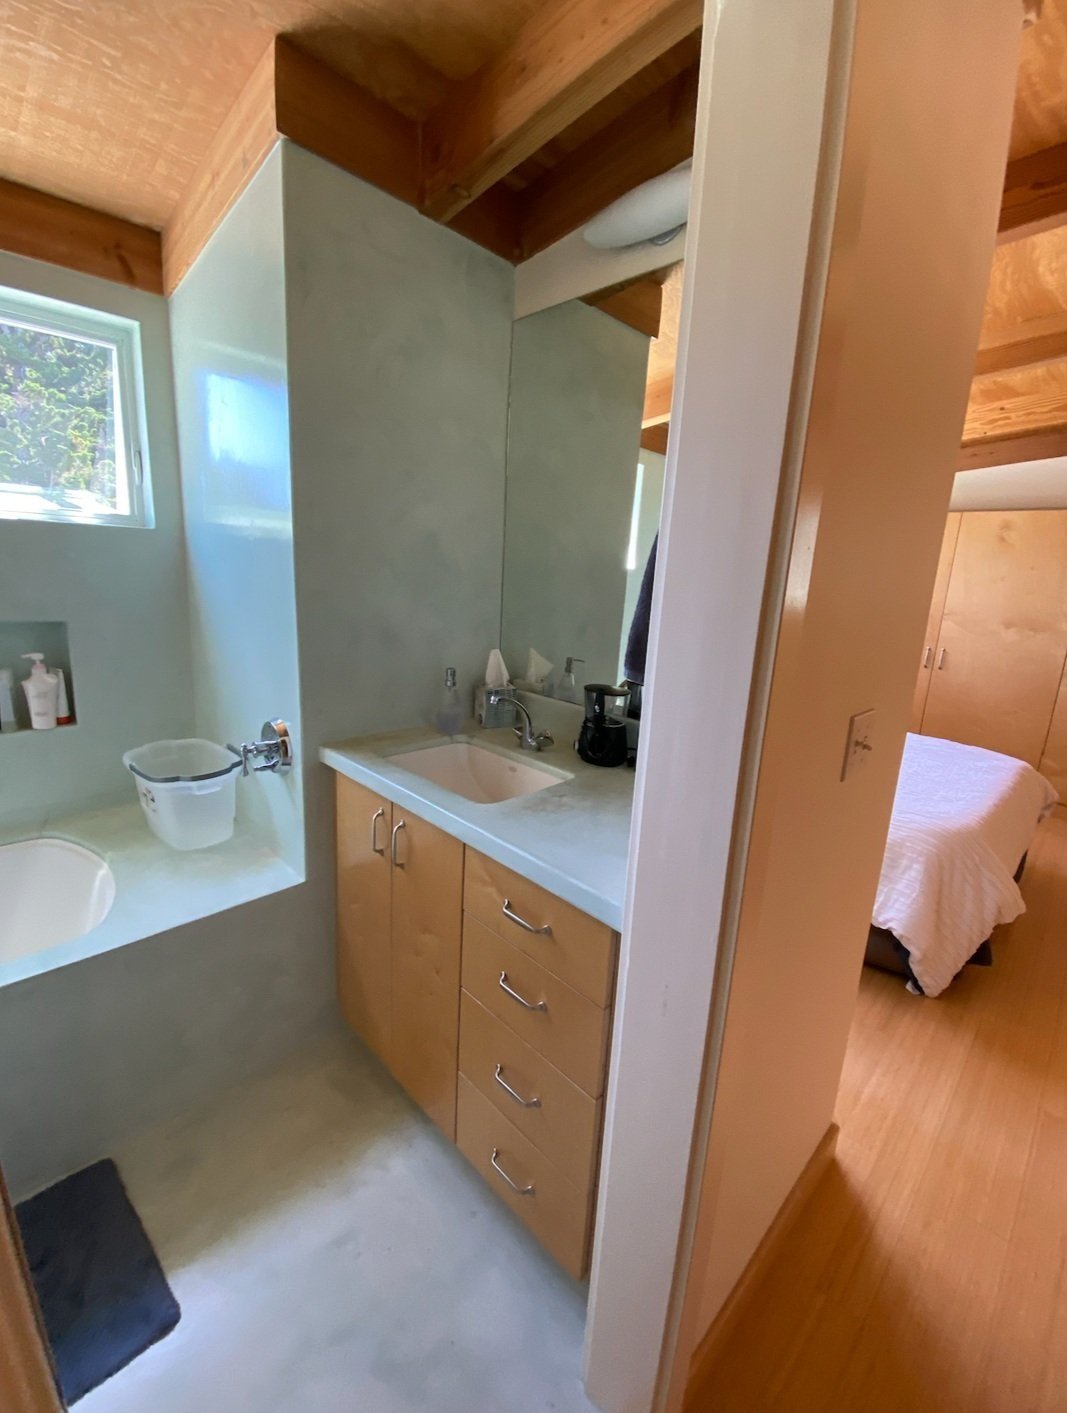  A bathroom with a small vanity with a light countertop and wooden cabinetry. The bedroom is visible past the open door.  